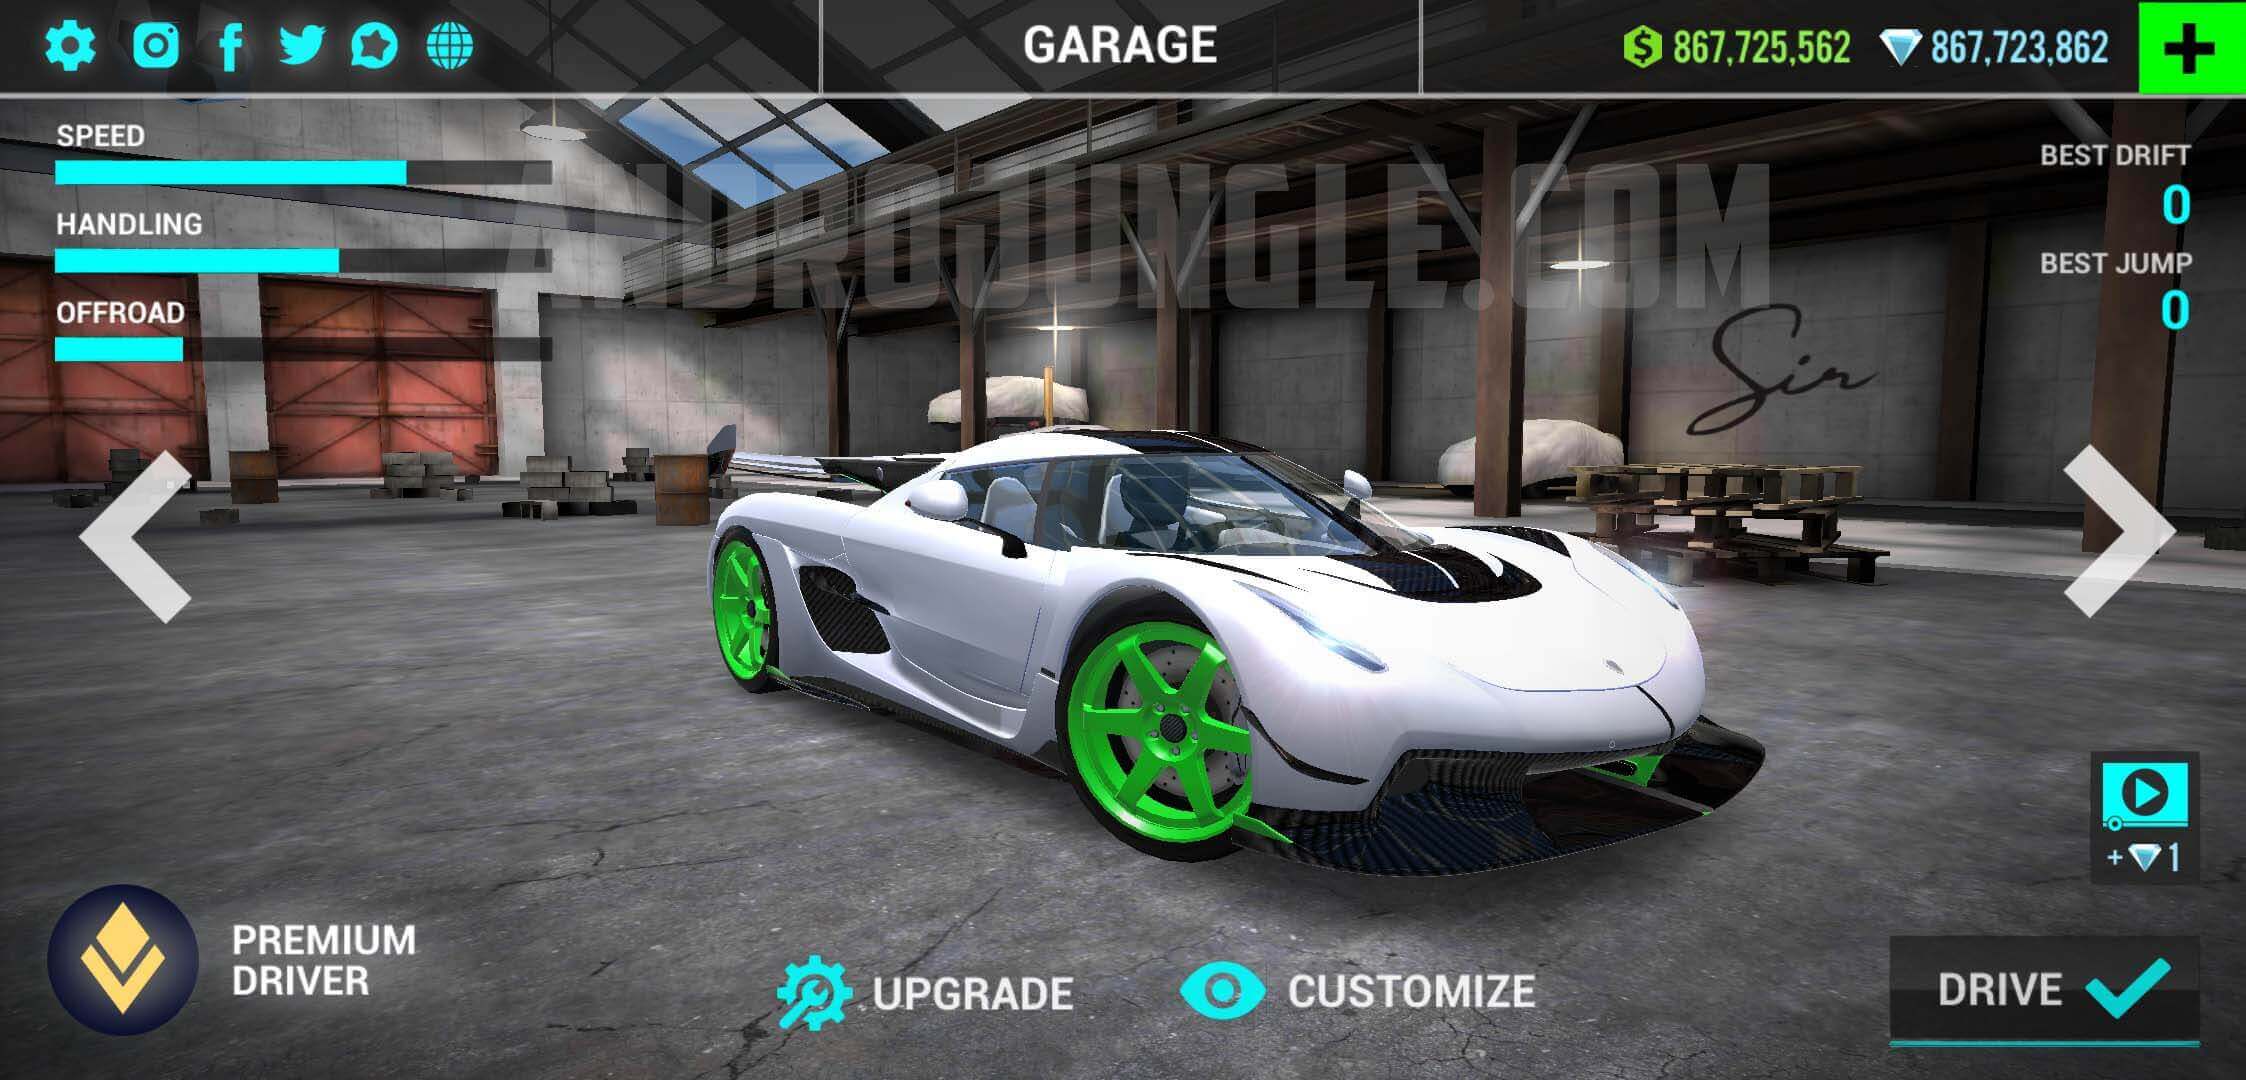 Ultimate Car Driving Simulator (MOD, Unlimited Money) 7.10.7 free on android